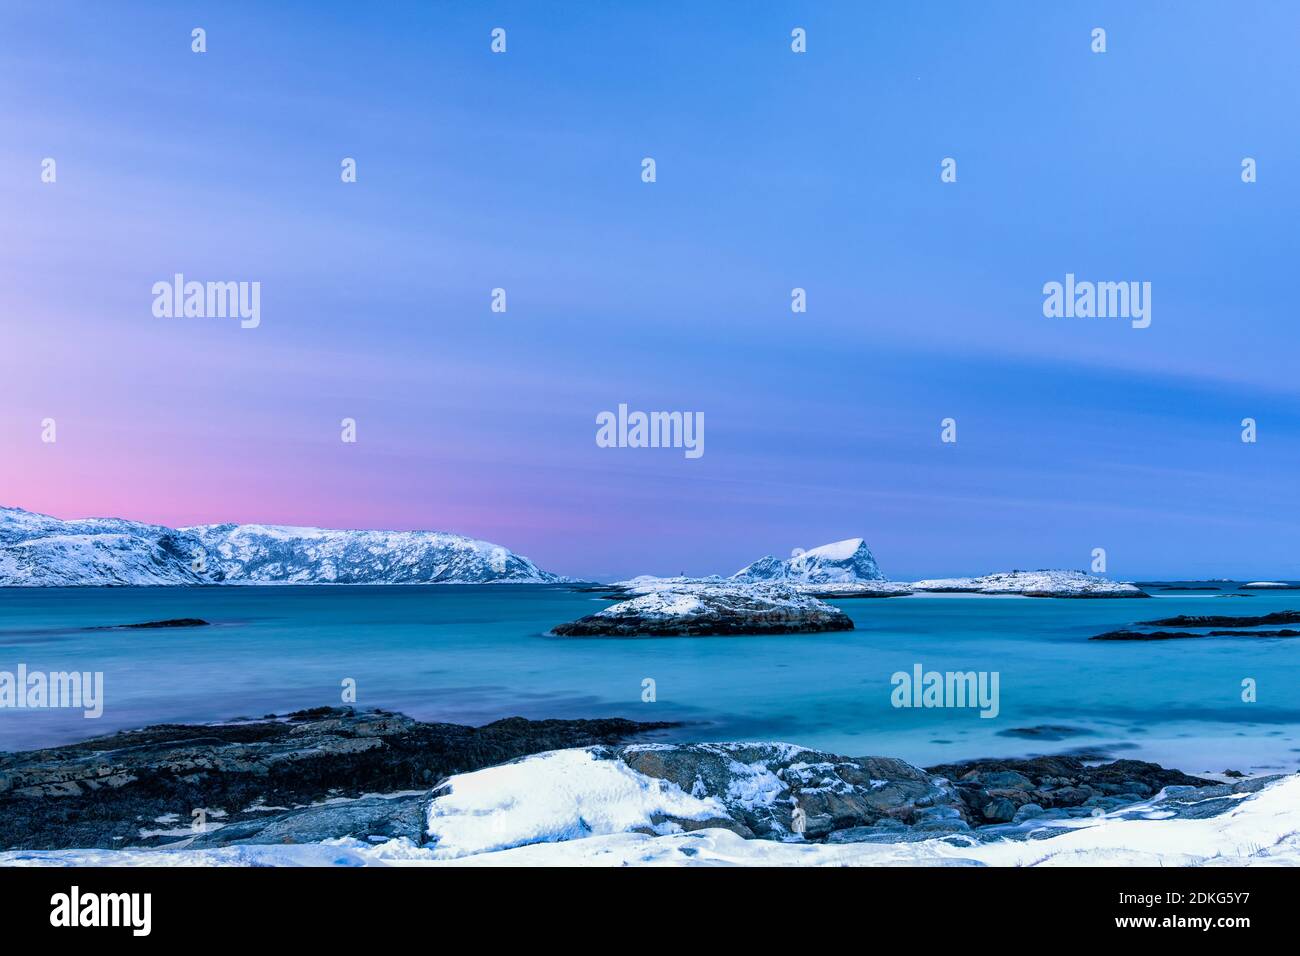 Frosty dawn on Sommaroy Island in winter with a view from the beach of the Northern European Sea and the snow-capped mountains on the horizon Stock Photo